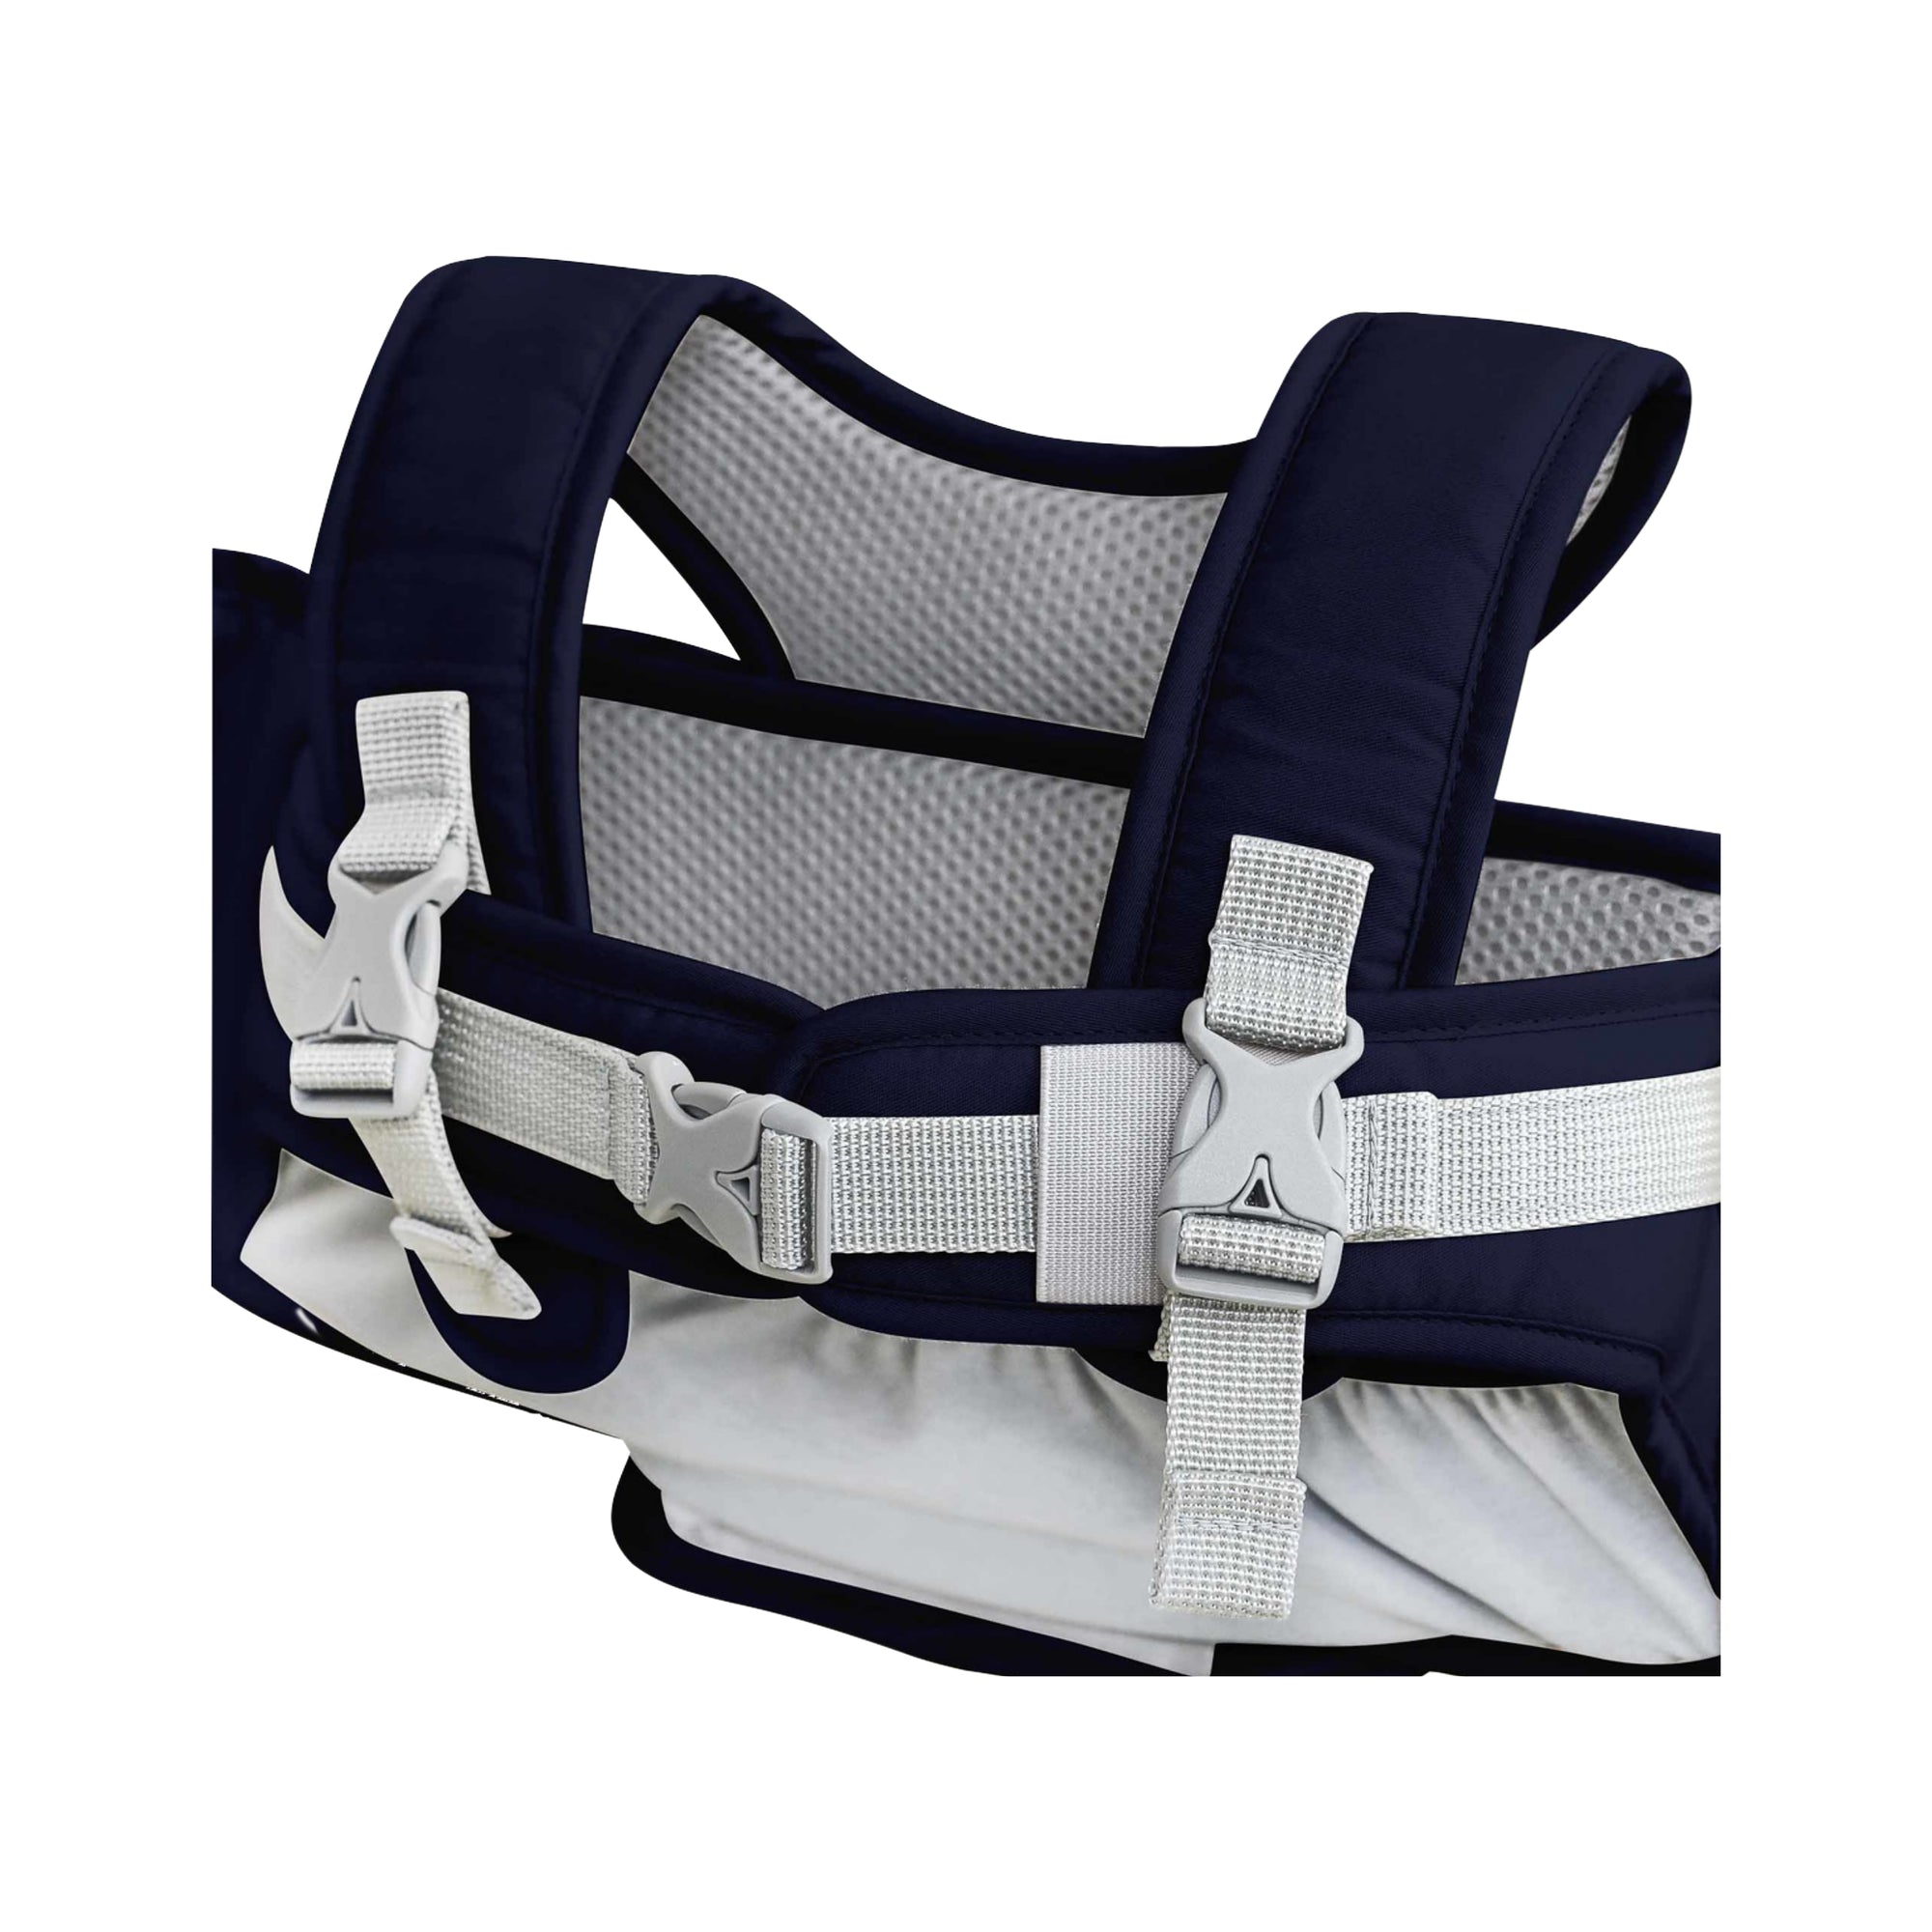 Back view of Pick-Me-Up soft baby walker or baby walking safety harness or baby leash